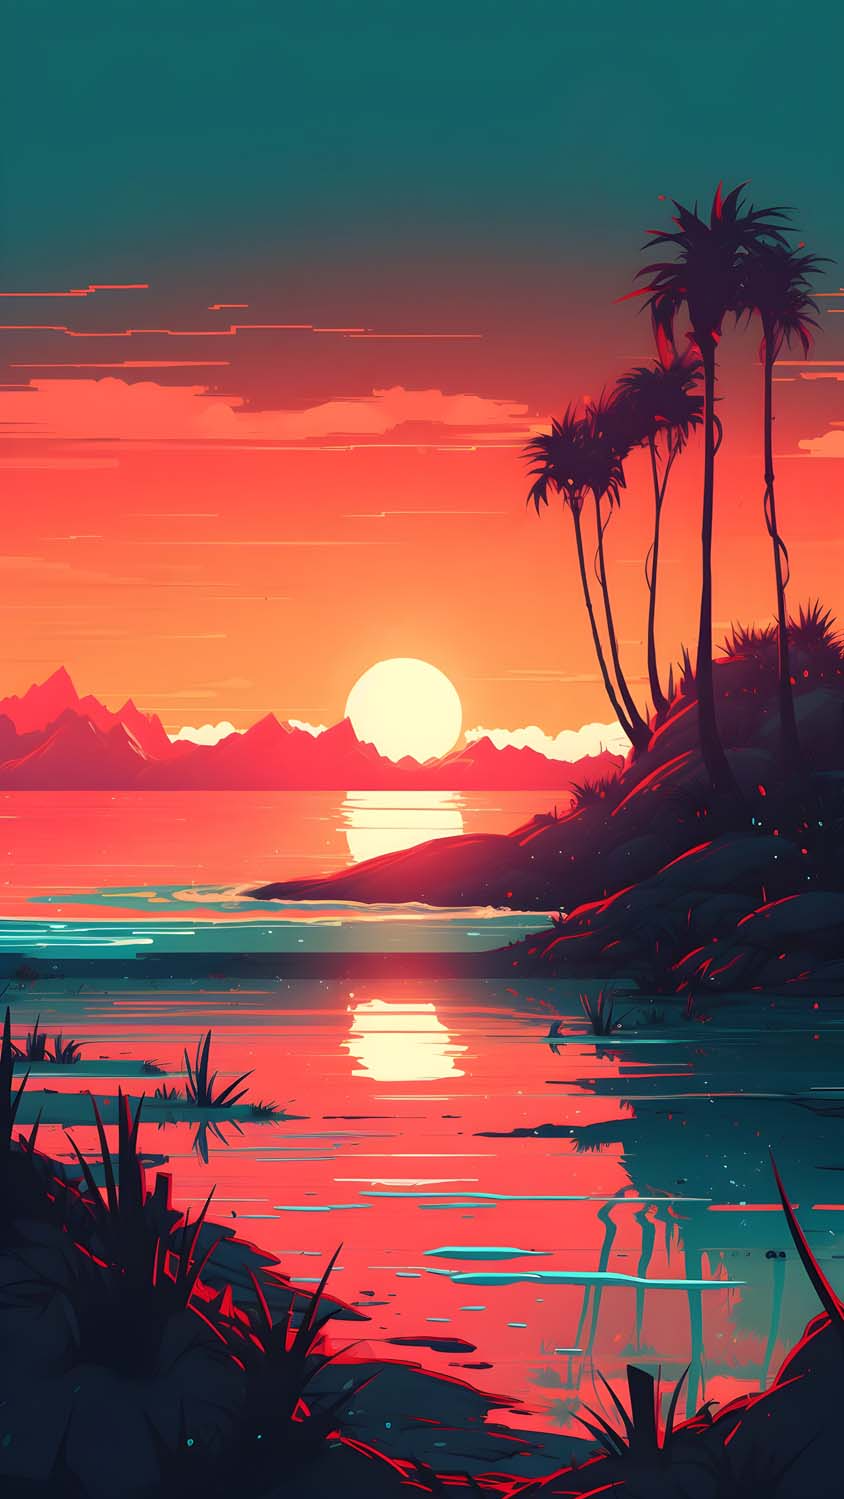 Sunset Beach Palm Trees IPhone Wallpaper HD IPhone Wallpapers